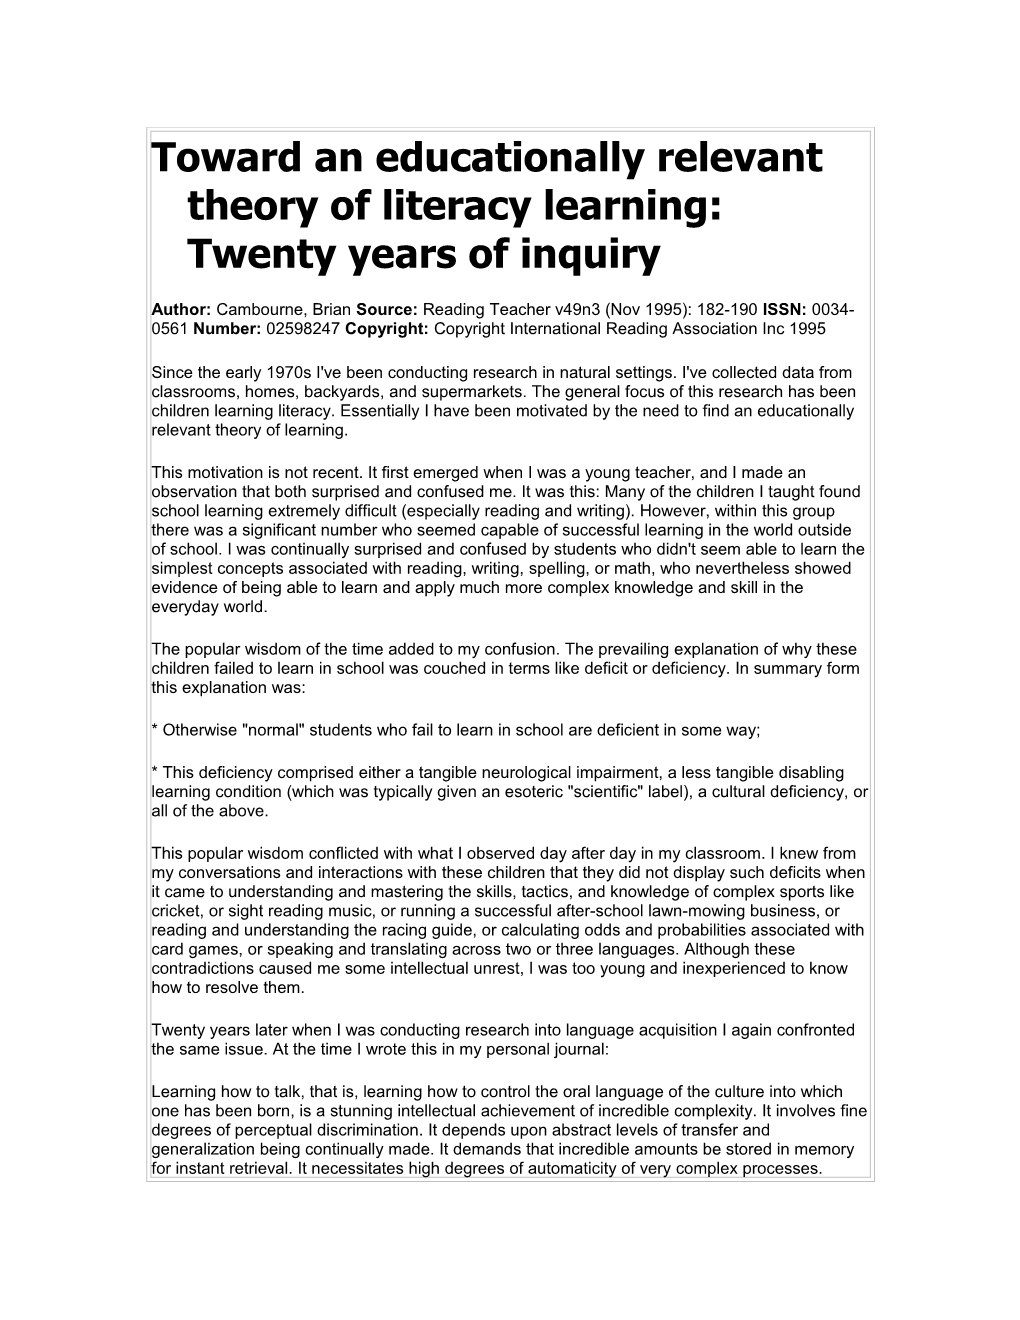 Toward an Educationally Relevant Theory of Literacy Learning: Twenty Years of Inquiry